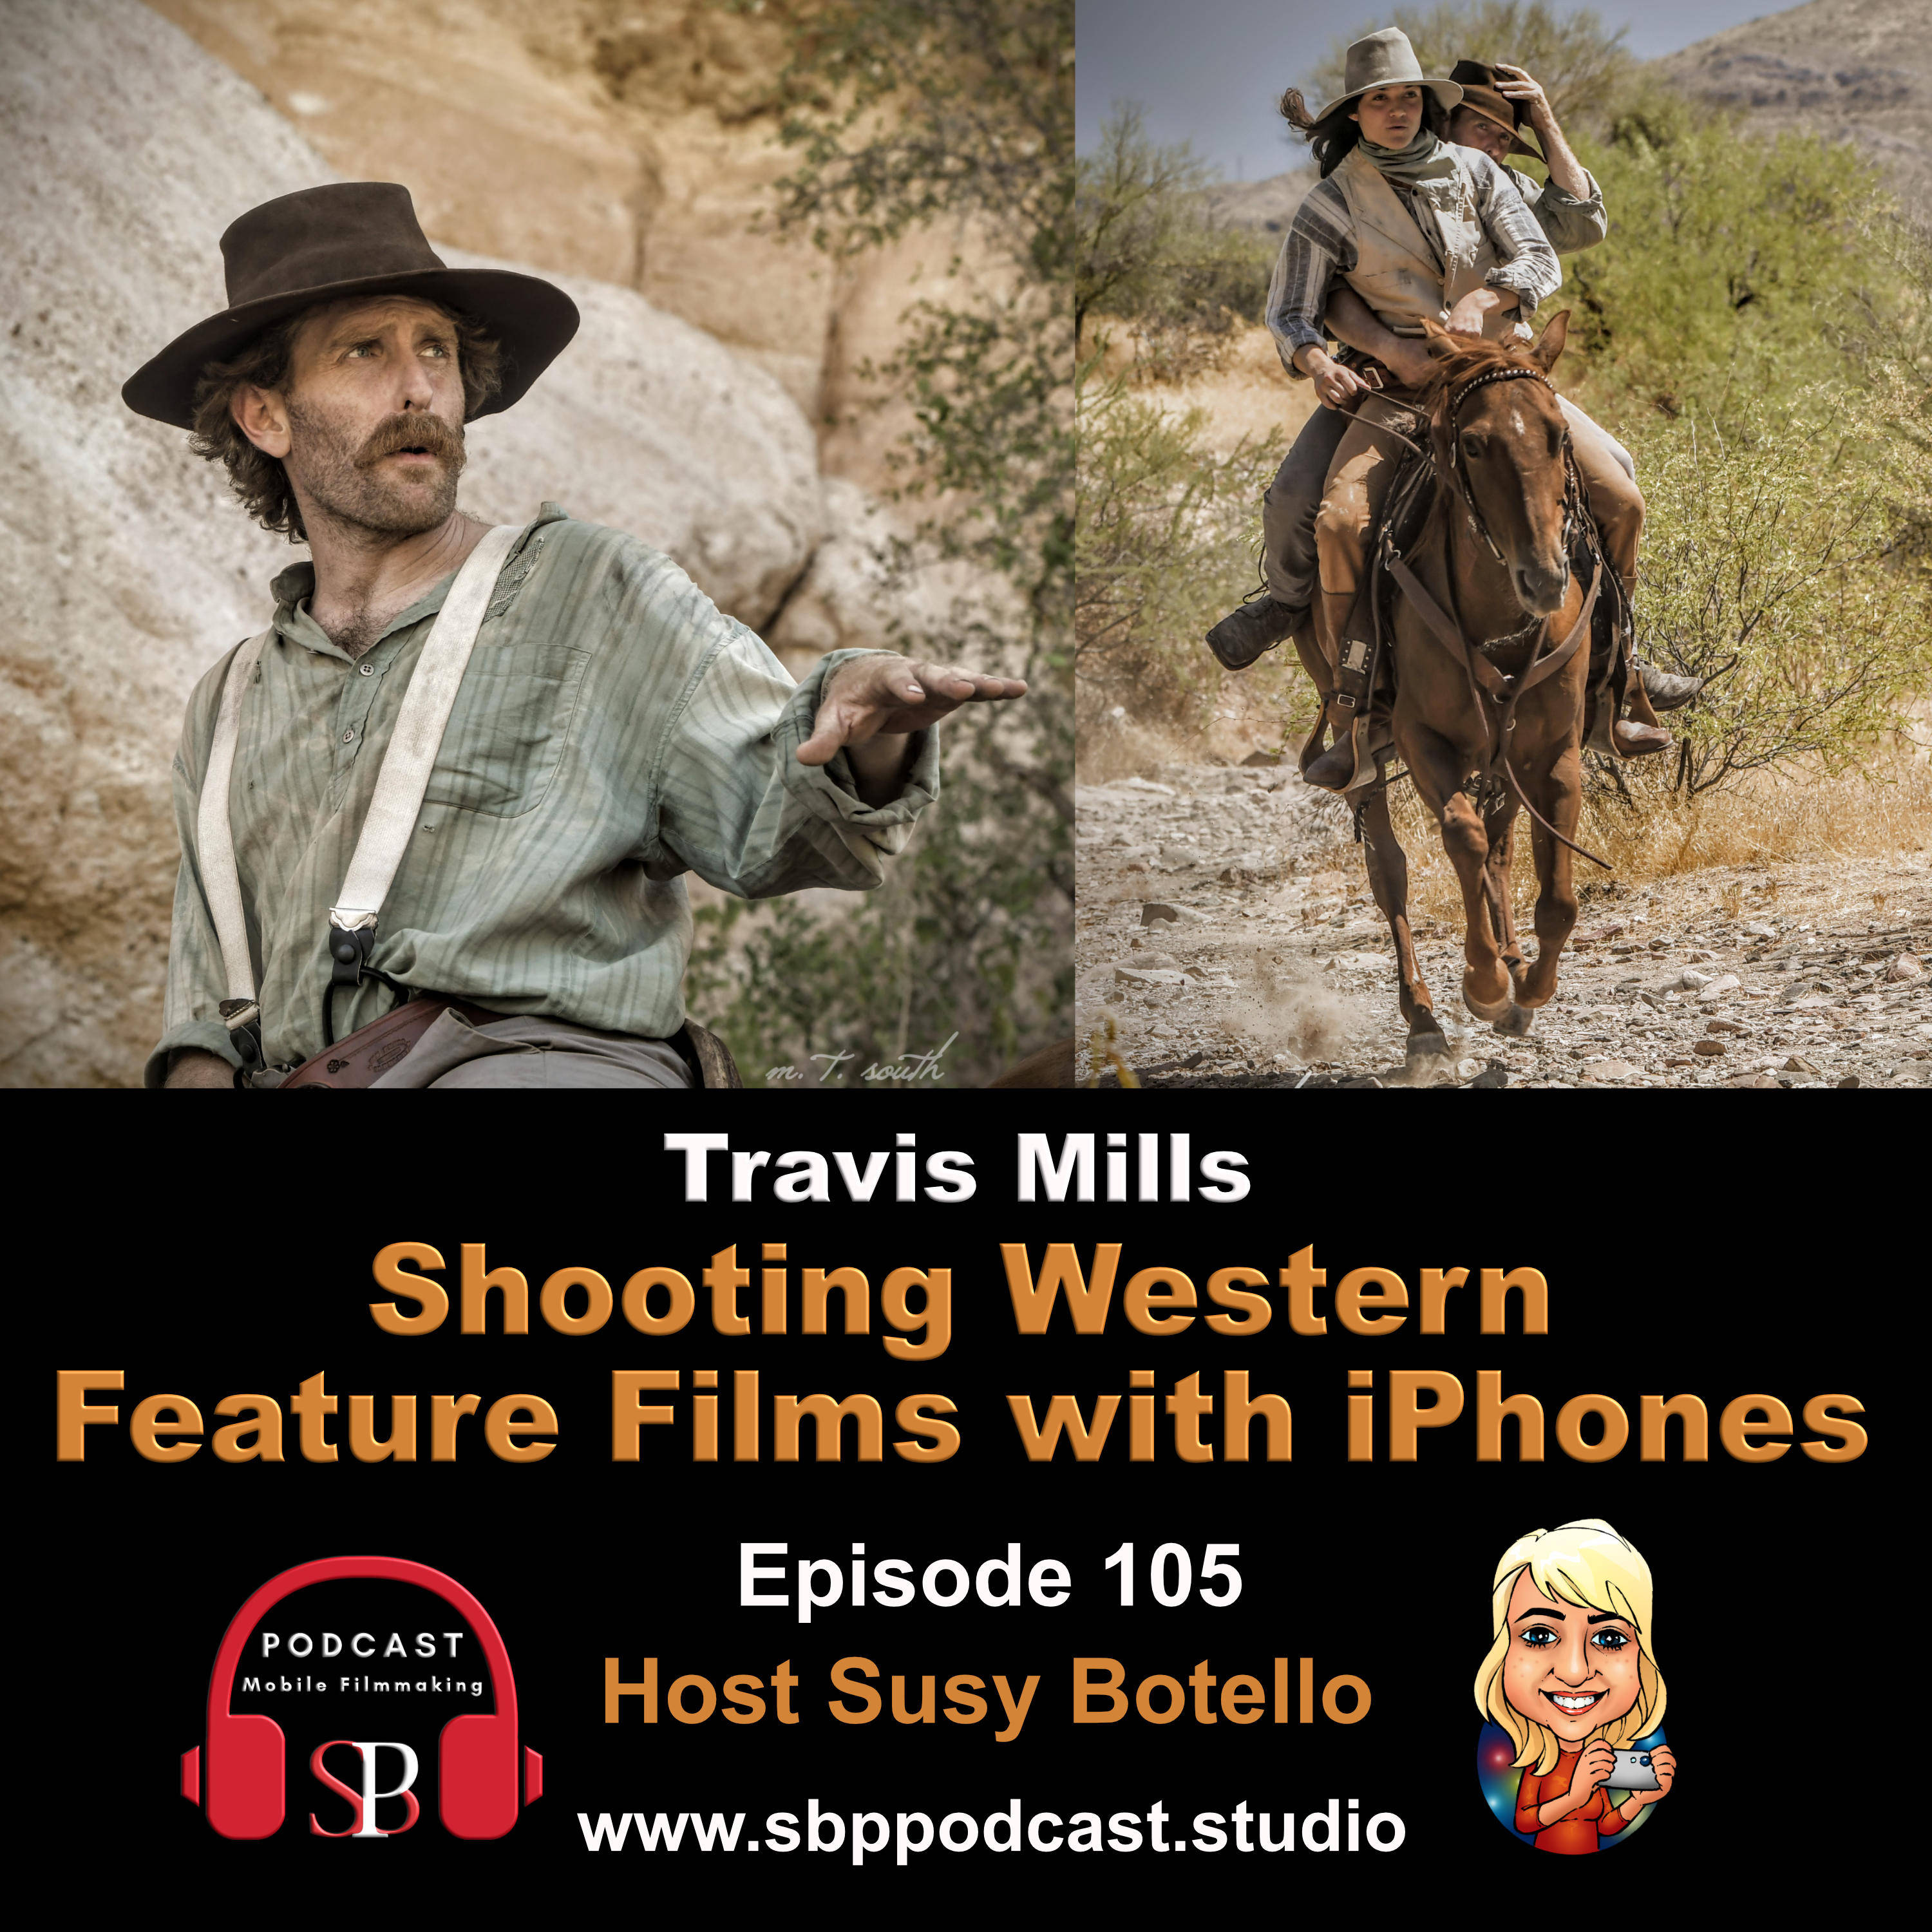 Shooting Western Feature Films with iPhones - Travis Mills Image